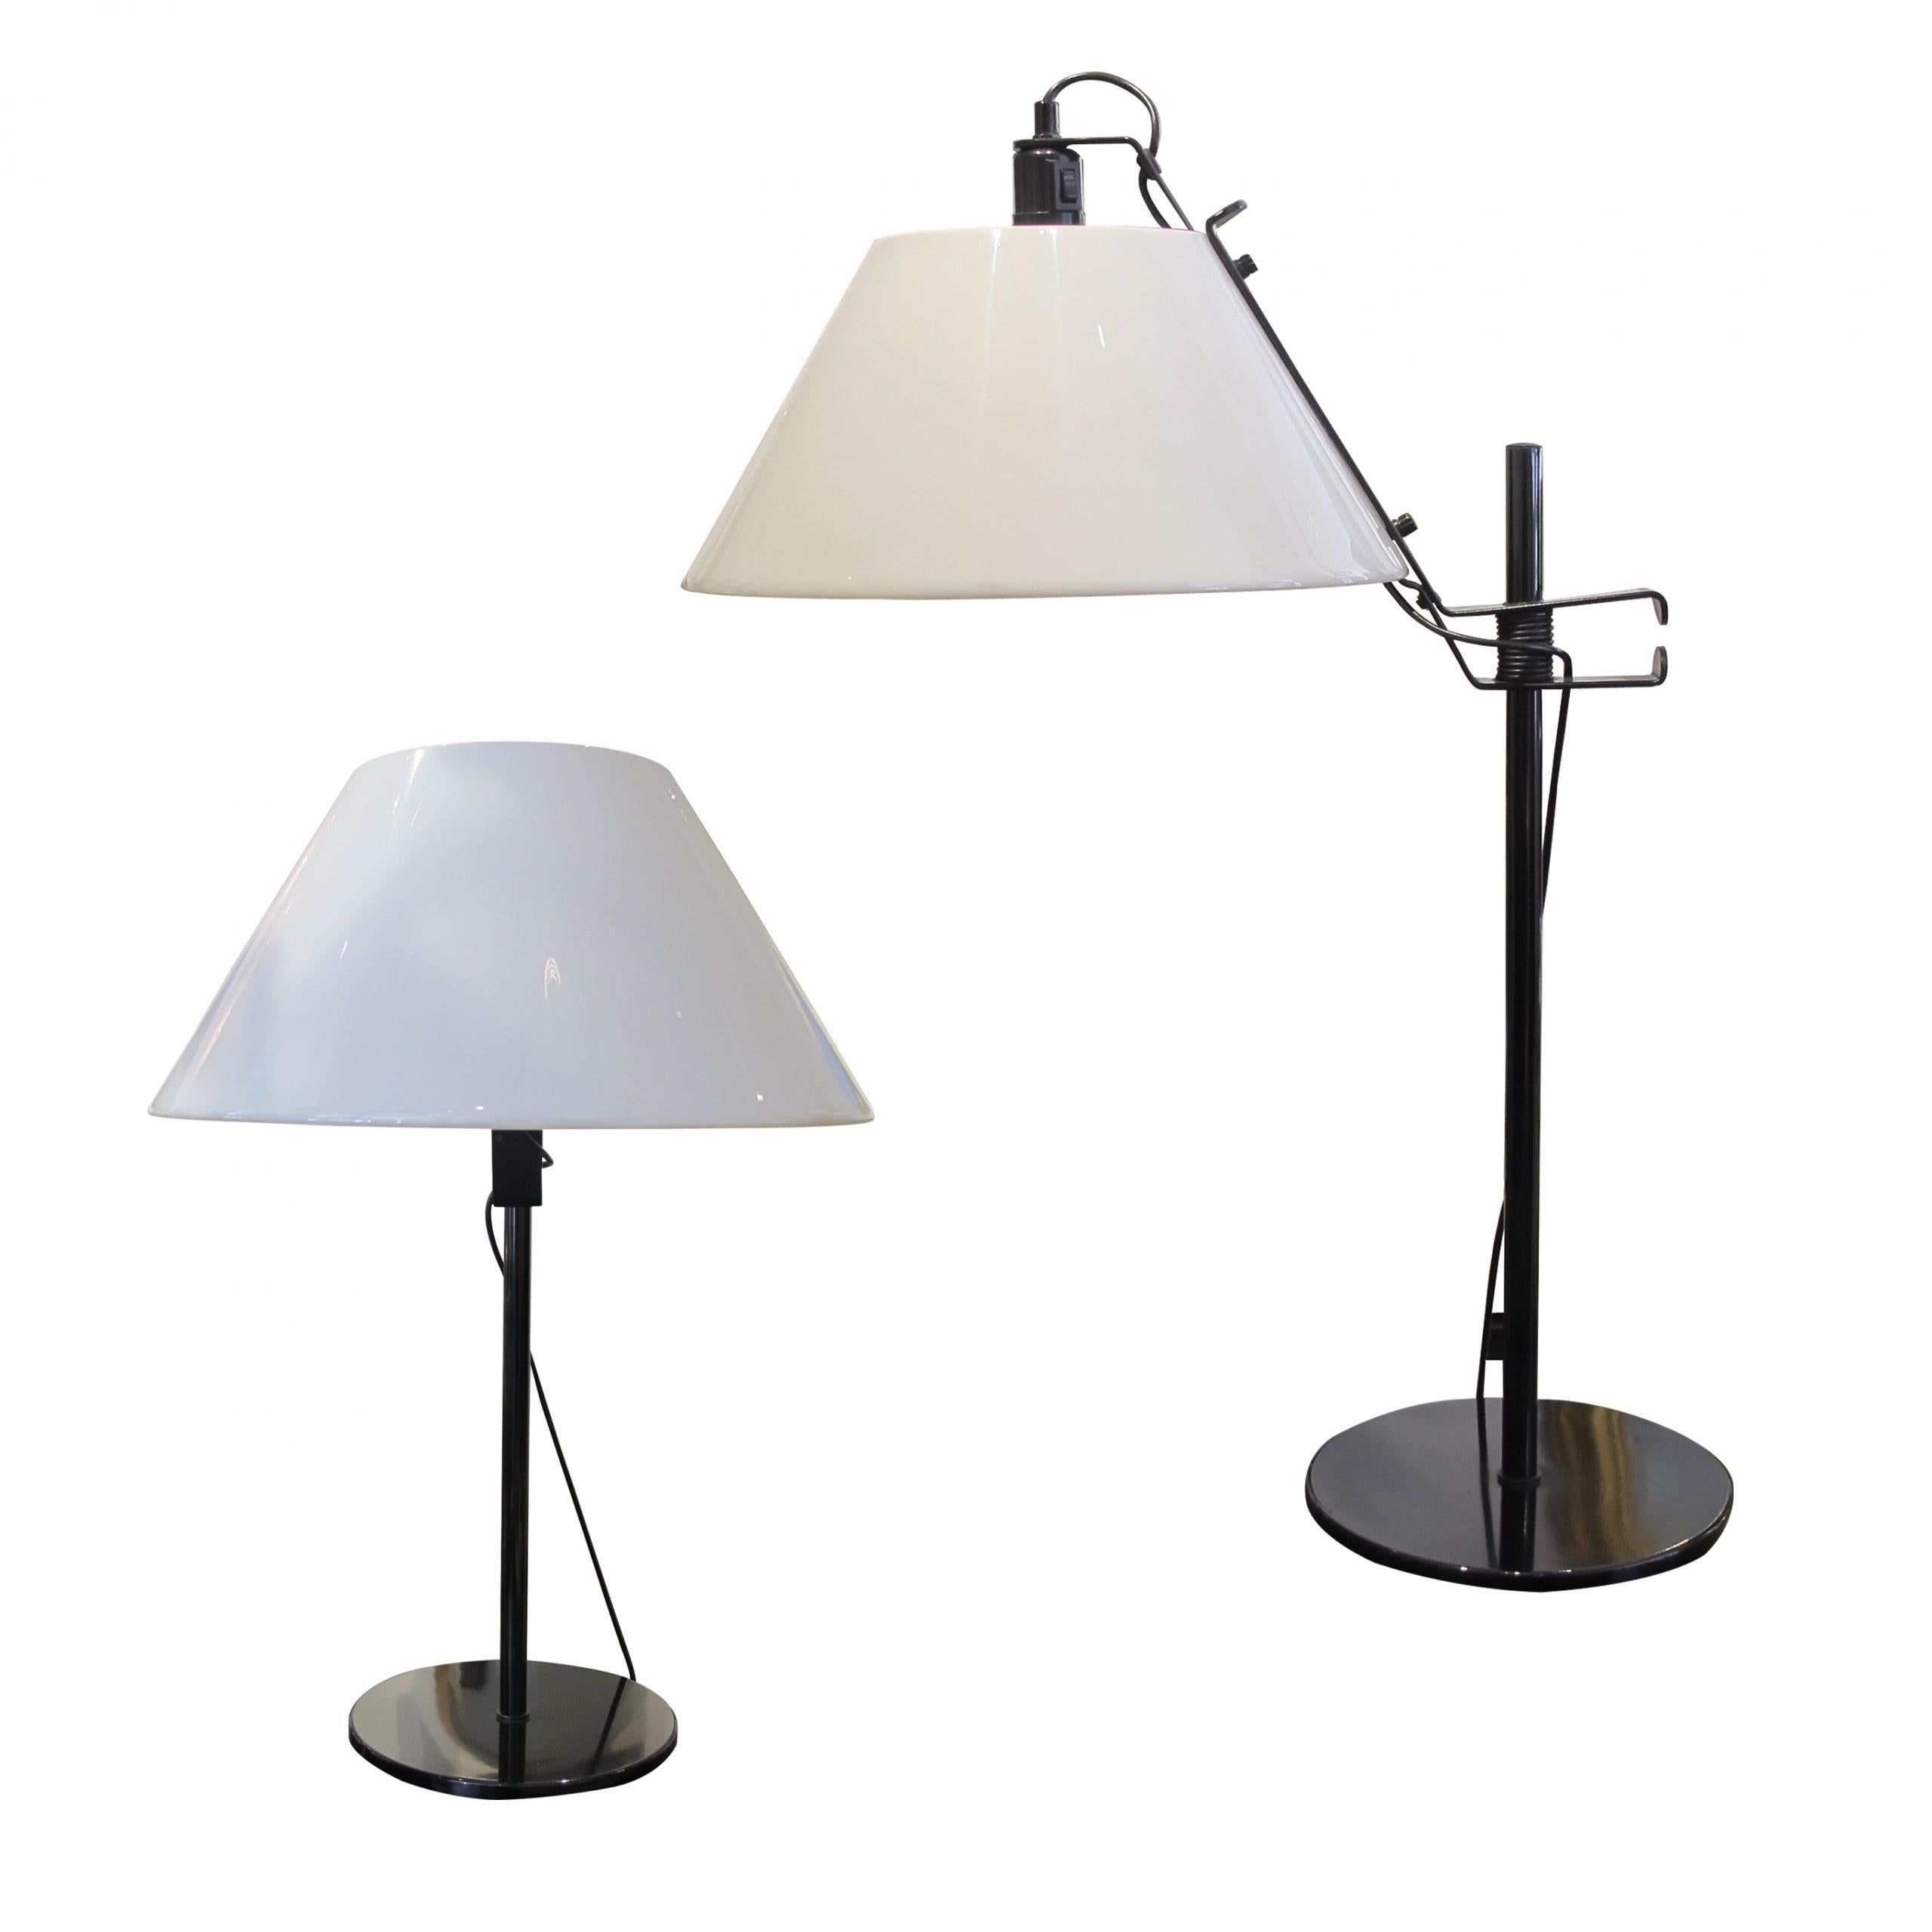 A large pair of table lamps by Metalarte with white adjustable conical Lucite shades. The shades are mounted on large spring clips to adjust their height as desired. Made in Spain in the 1960s. The lamps are finished with a black galvanised base and